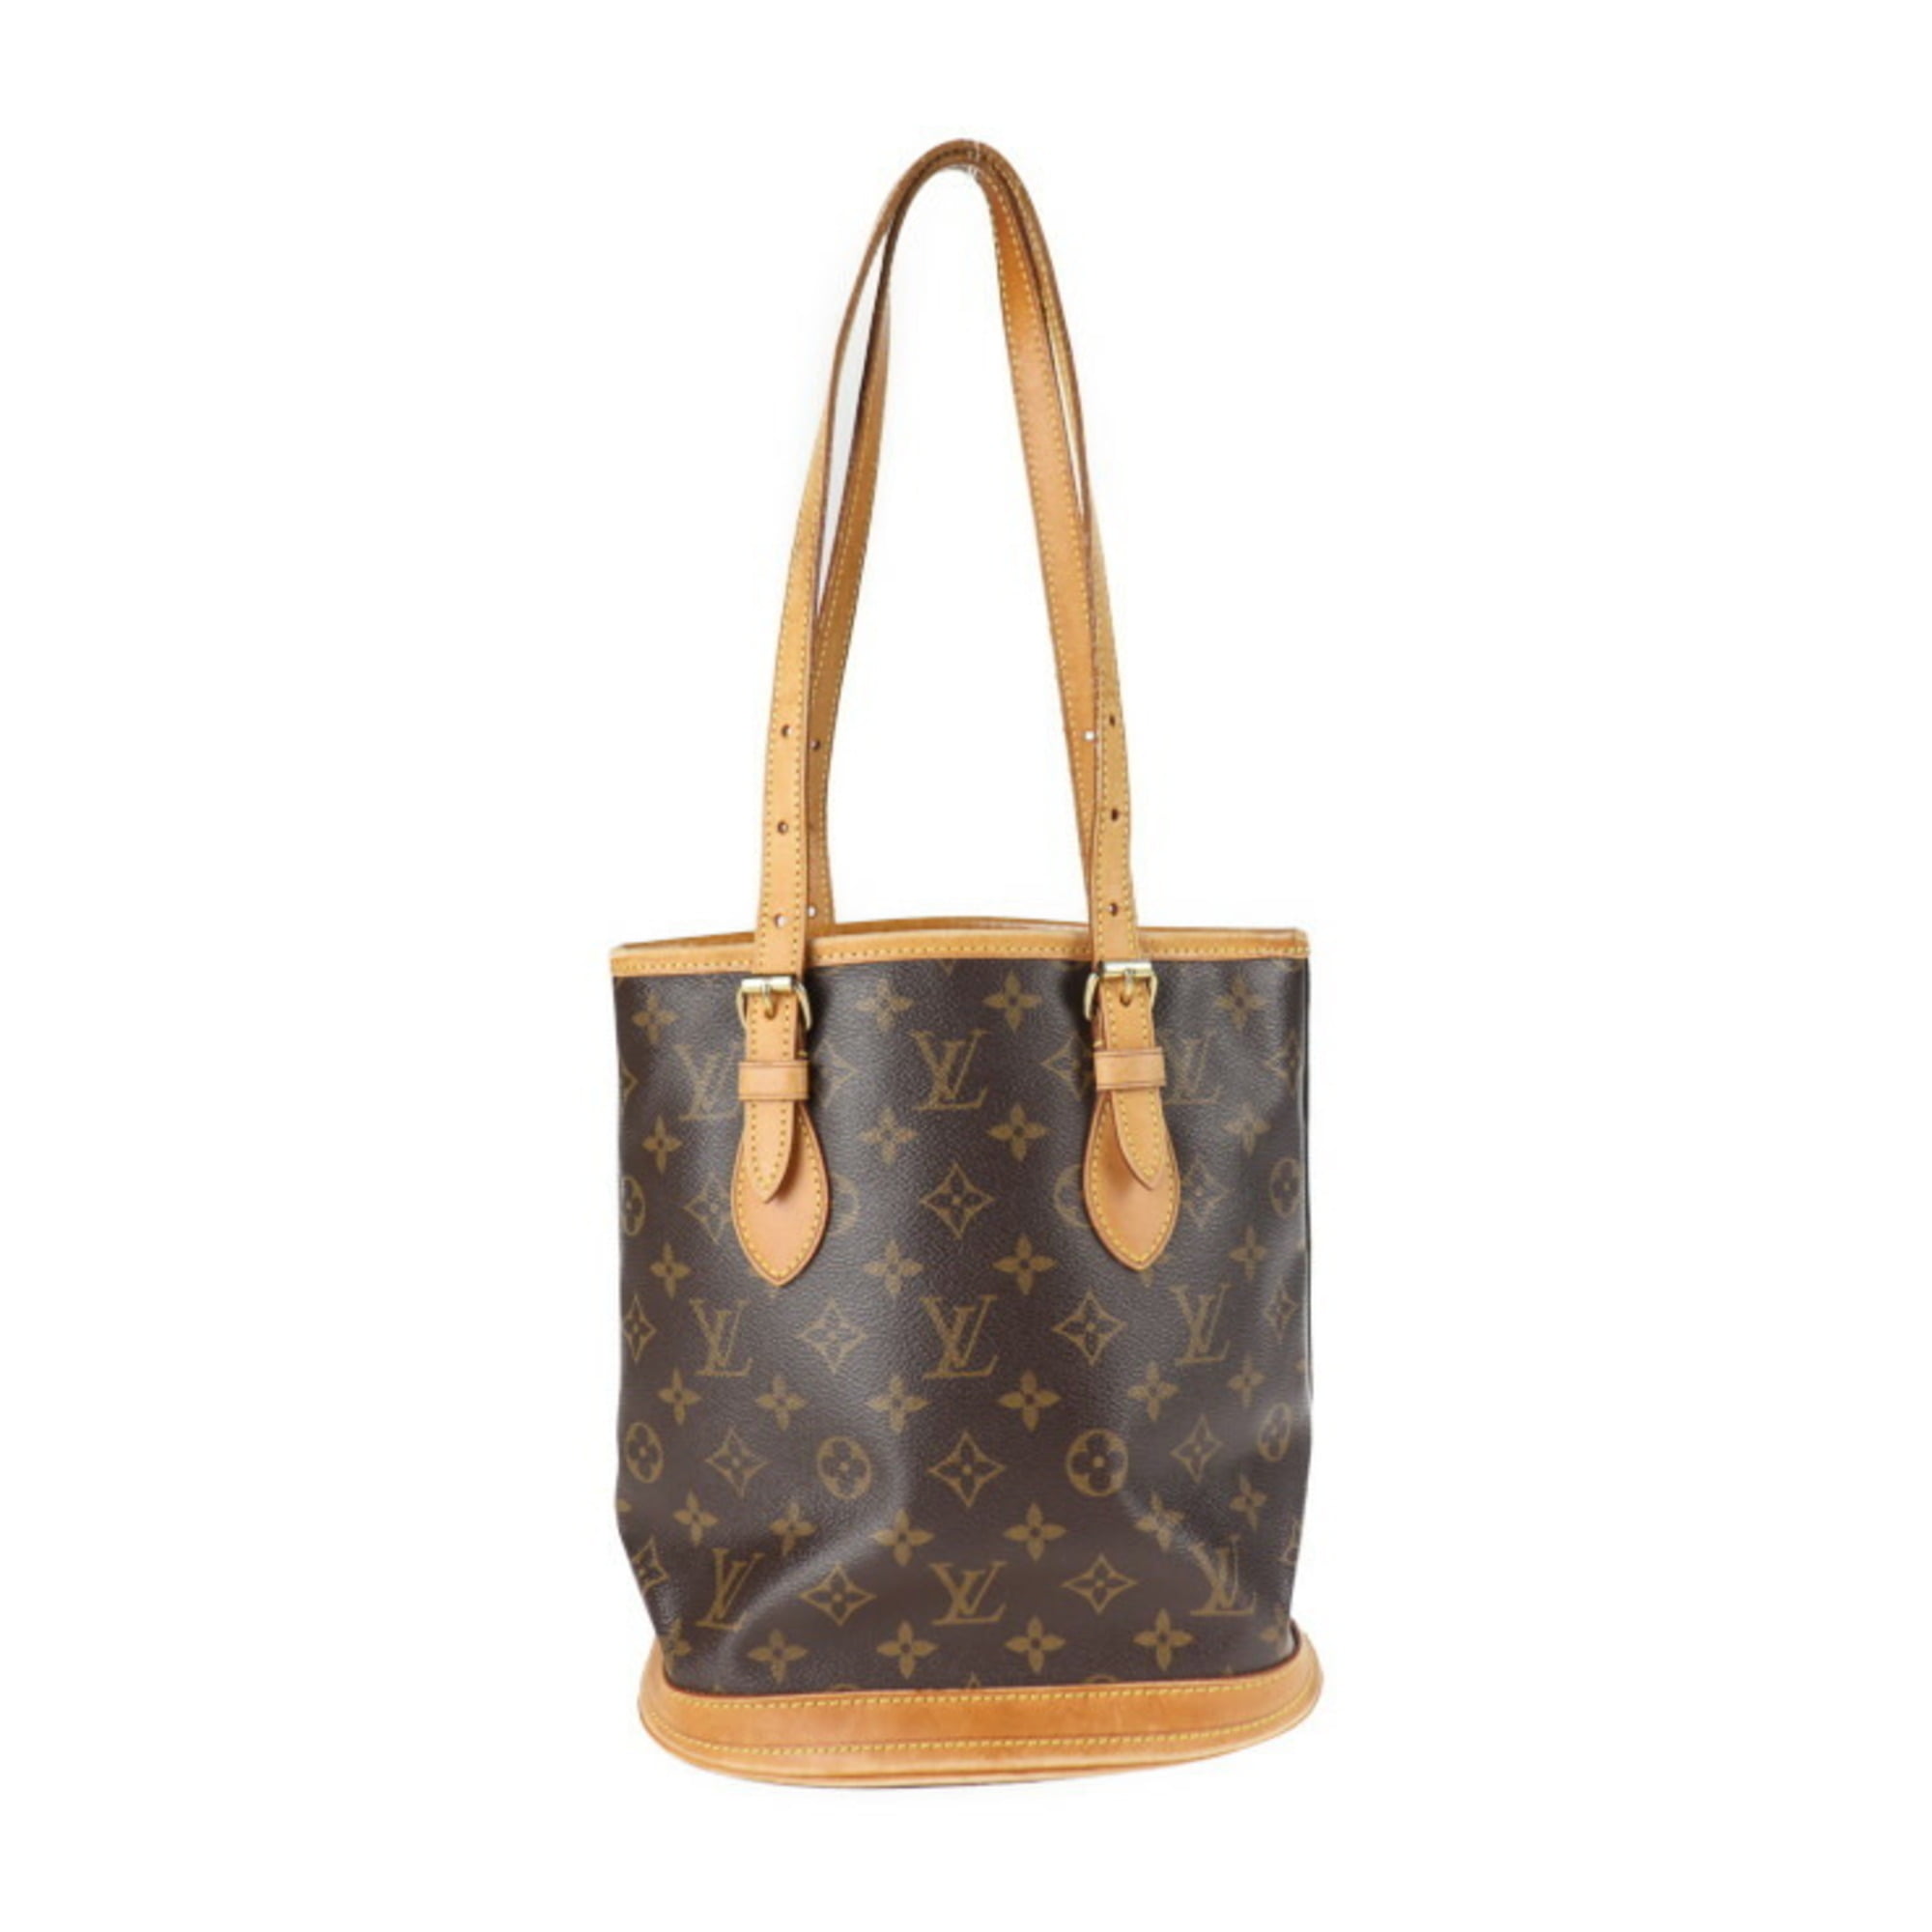 Authenticated Used LOUIS VUITTON Louis Vuitton Bucket PM Monogram Tote ...